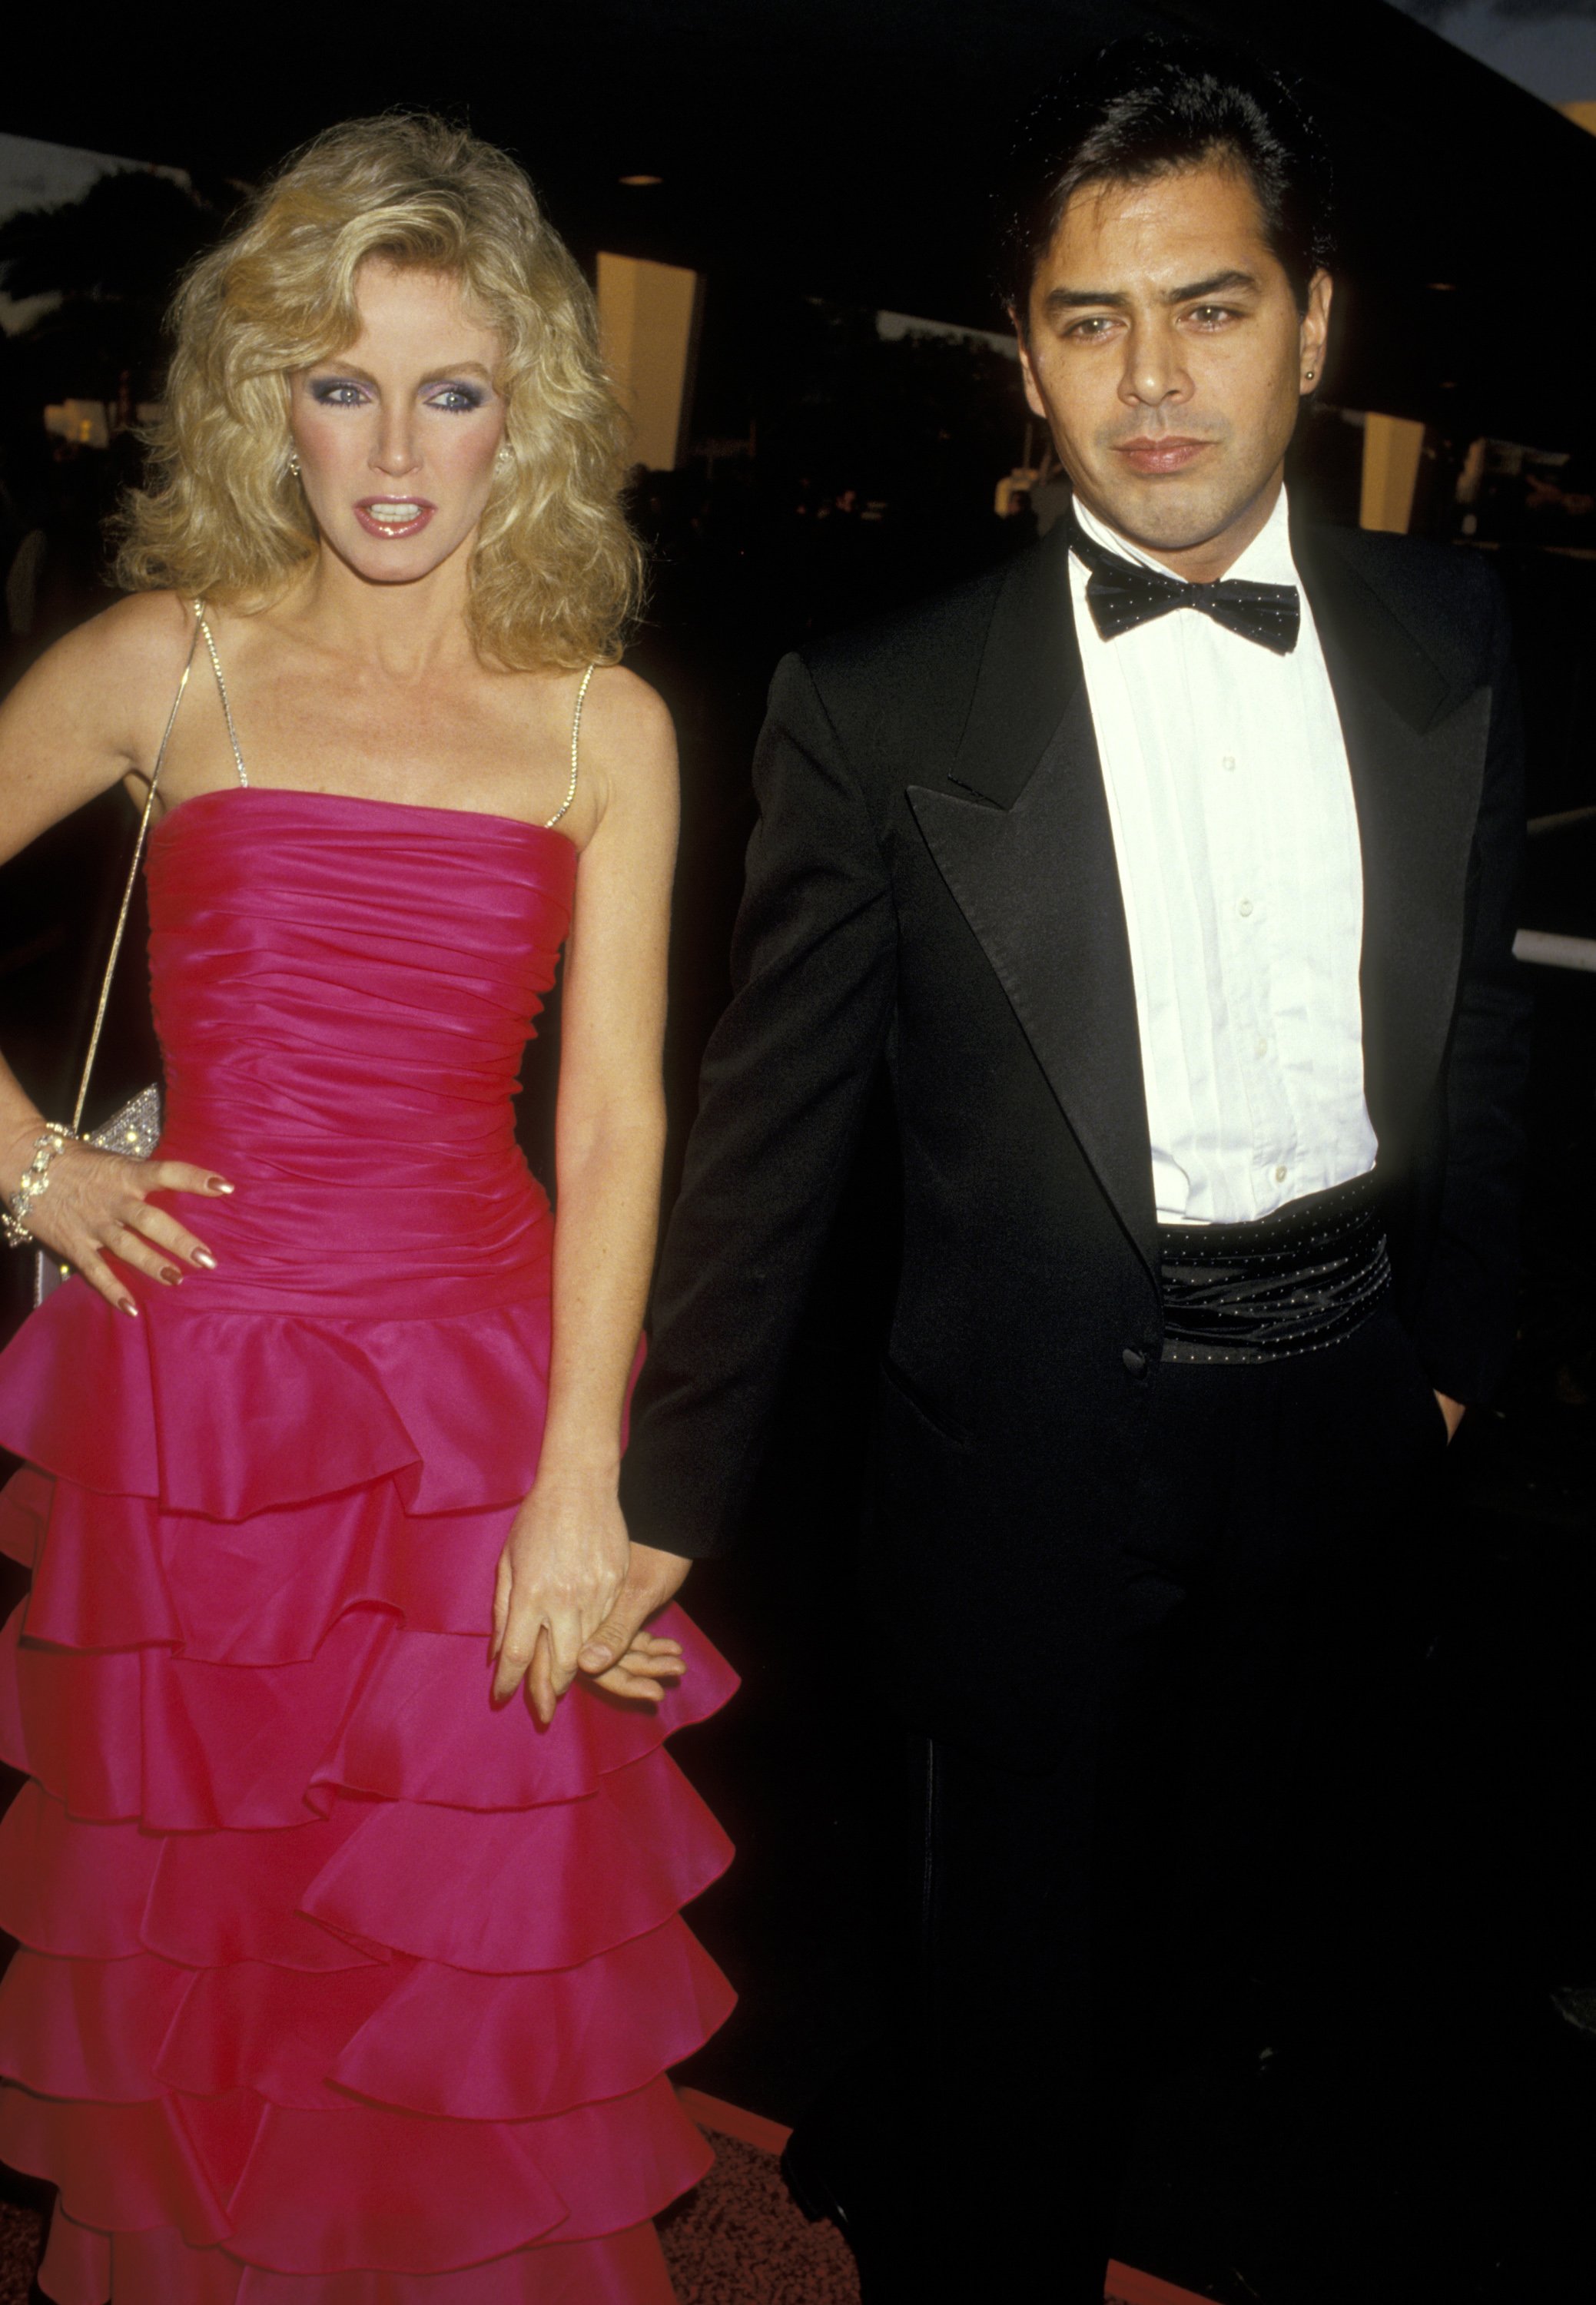 Donna Mills and Richard Holland during 13th Annual People's Choice Awards at Santa Monica Civic Auditorium in Santa Monica, California | Source: Getty Images